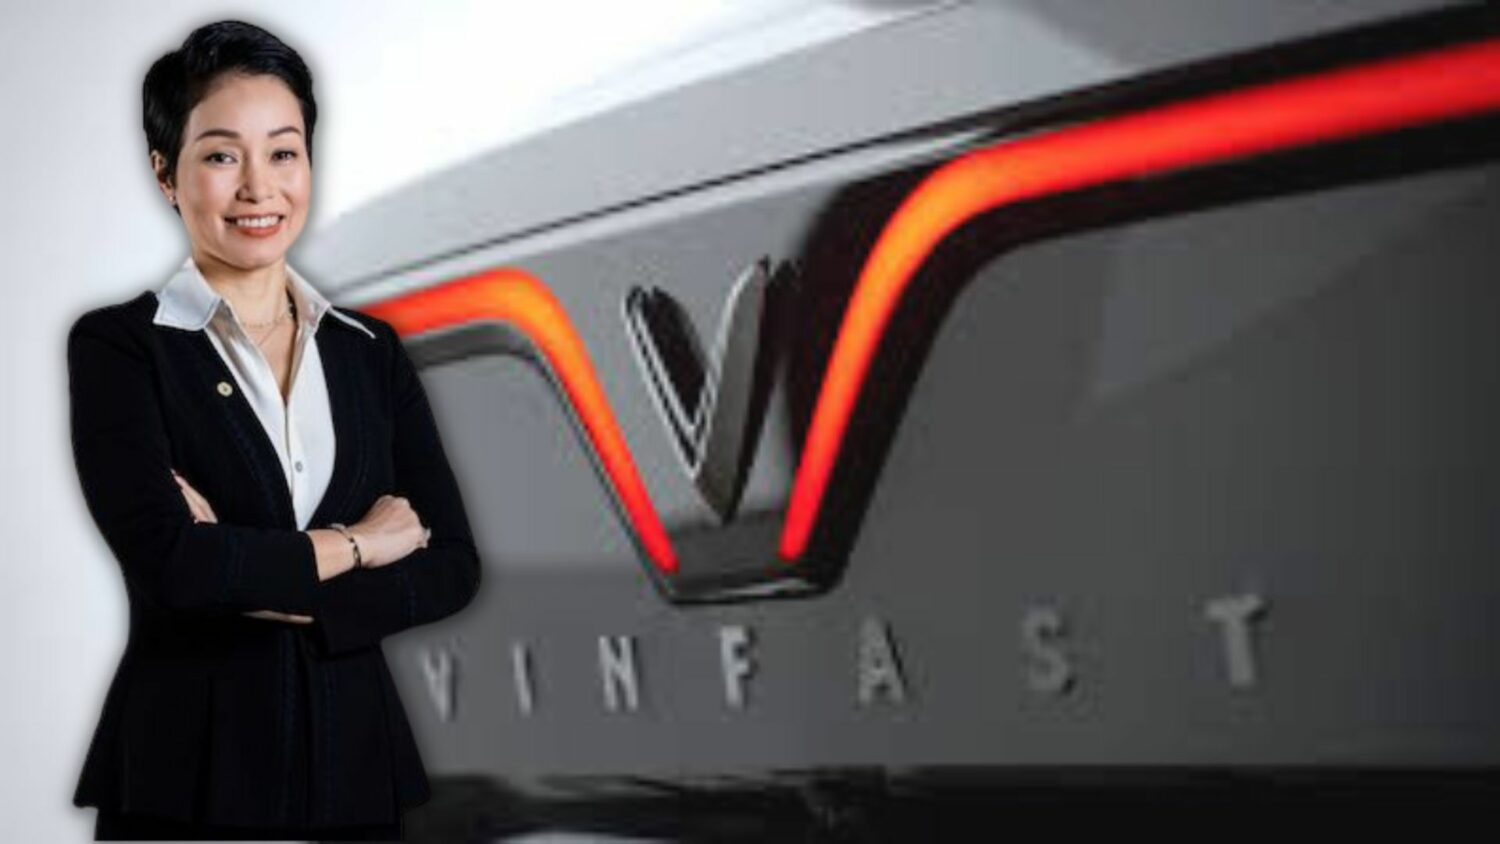 VinFast, a Vietnamese manufacturer of EVs, made an extraordinary debut on the Nasdaq stock market on August 15. Shares of the automaker, which went public through a merger with exceptional purpose acquisition firm Black Spade Acquisition, climbed 68% to finish at $37.06 and were valued at $86 billion, considerably exceeding those of Ford, GM, and Stellantis.